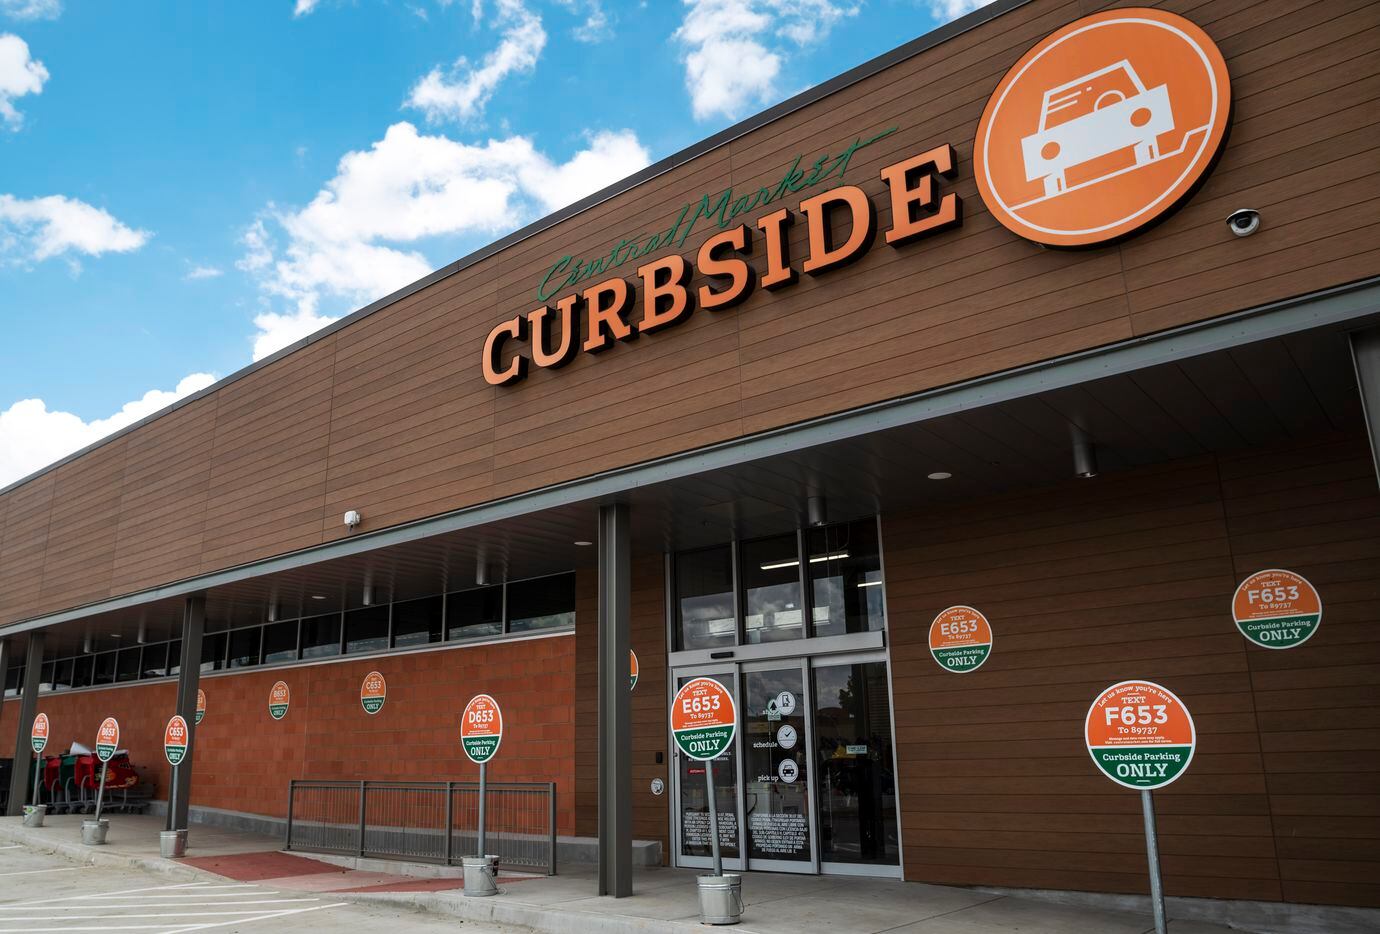 The expanded store has room for a curbside pickup area.